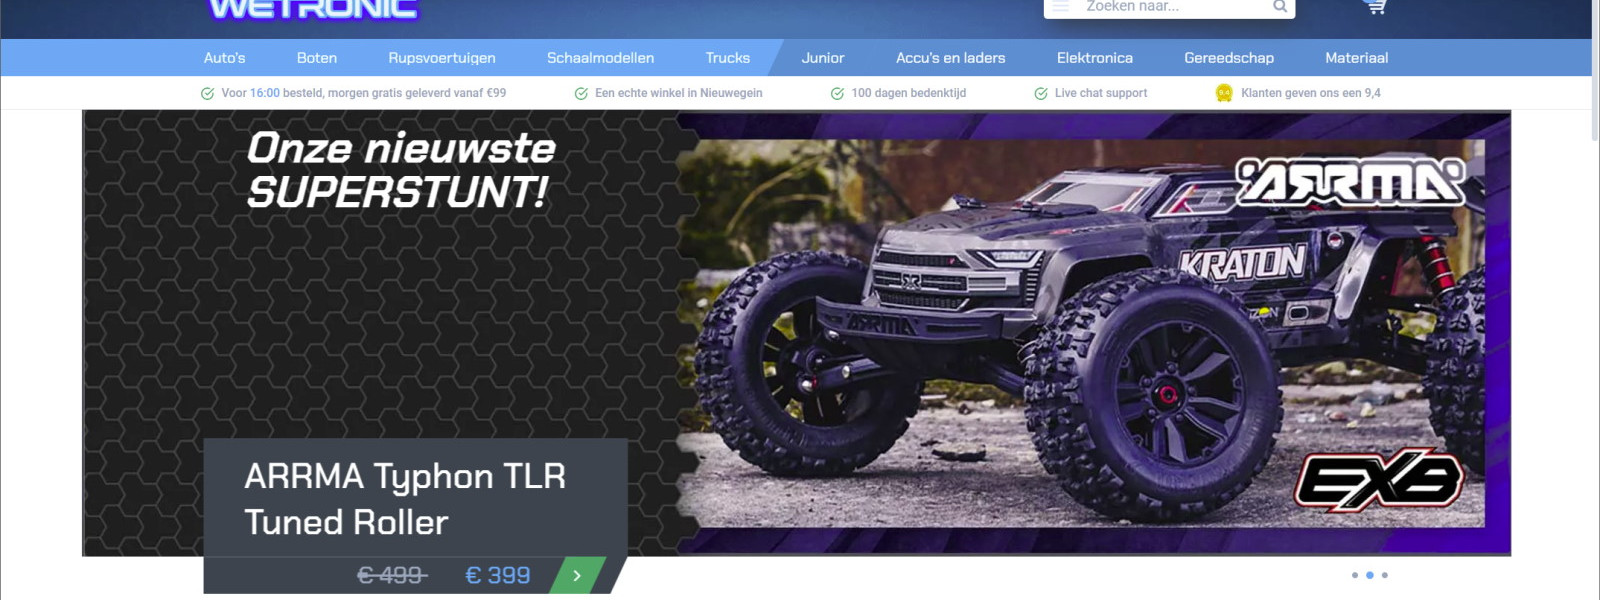 Fully new website for Wetronic!